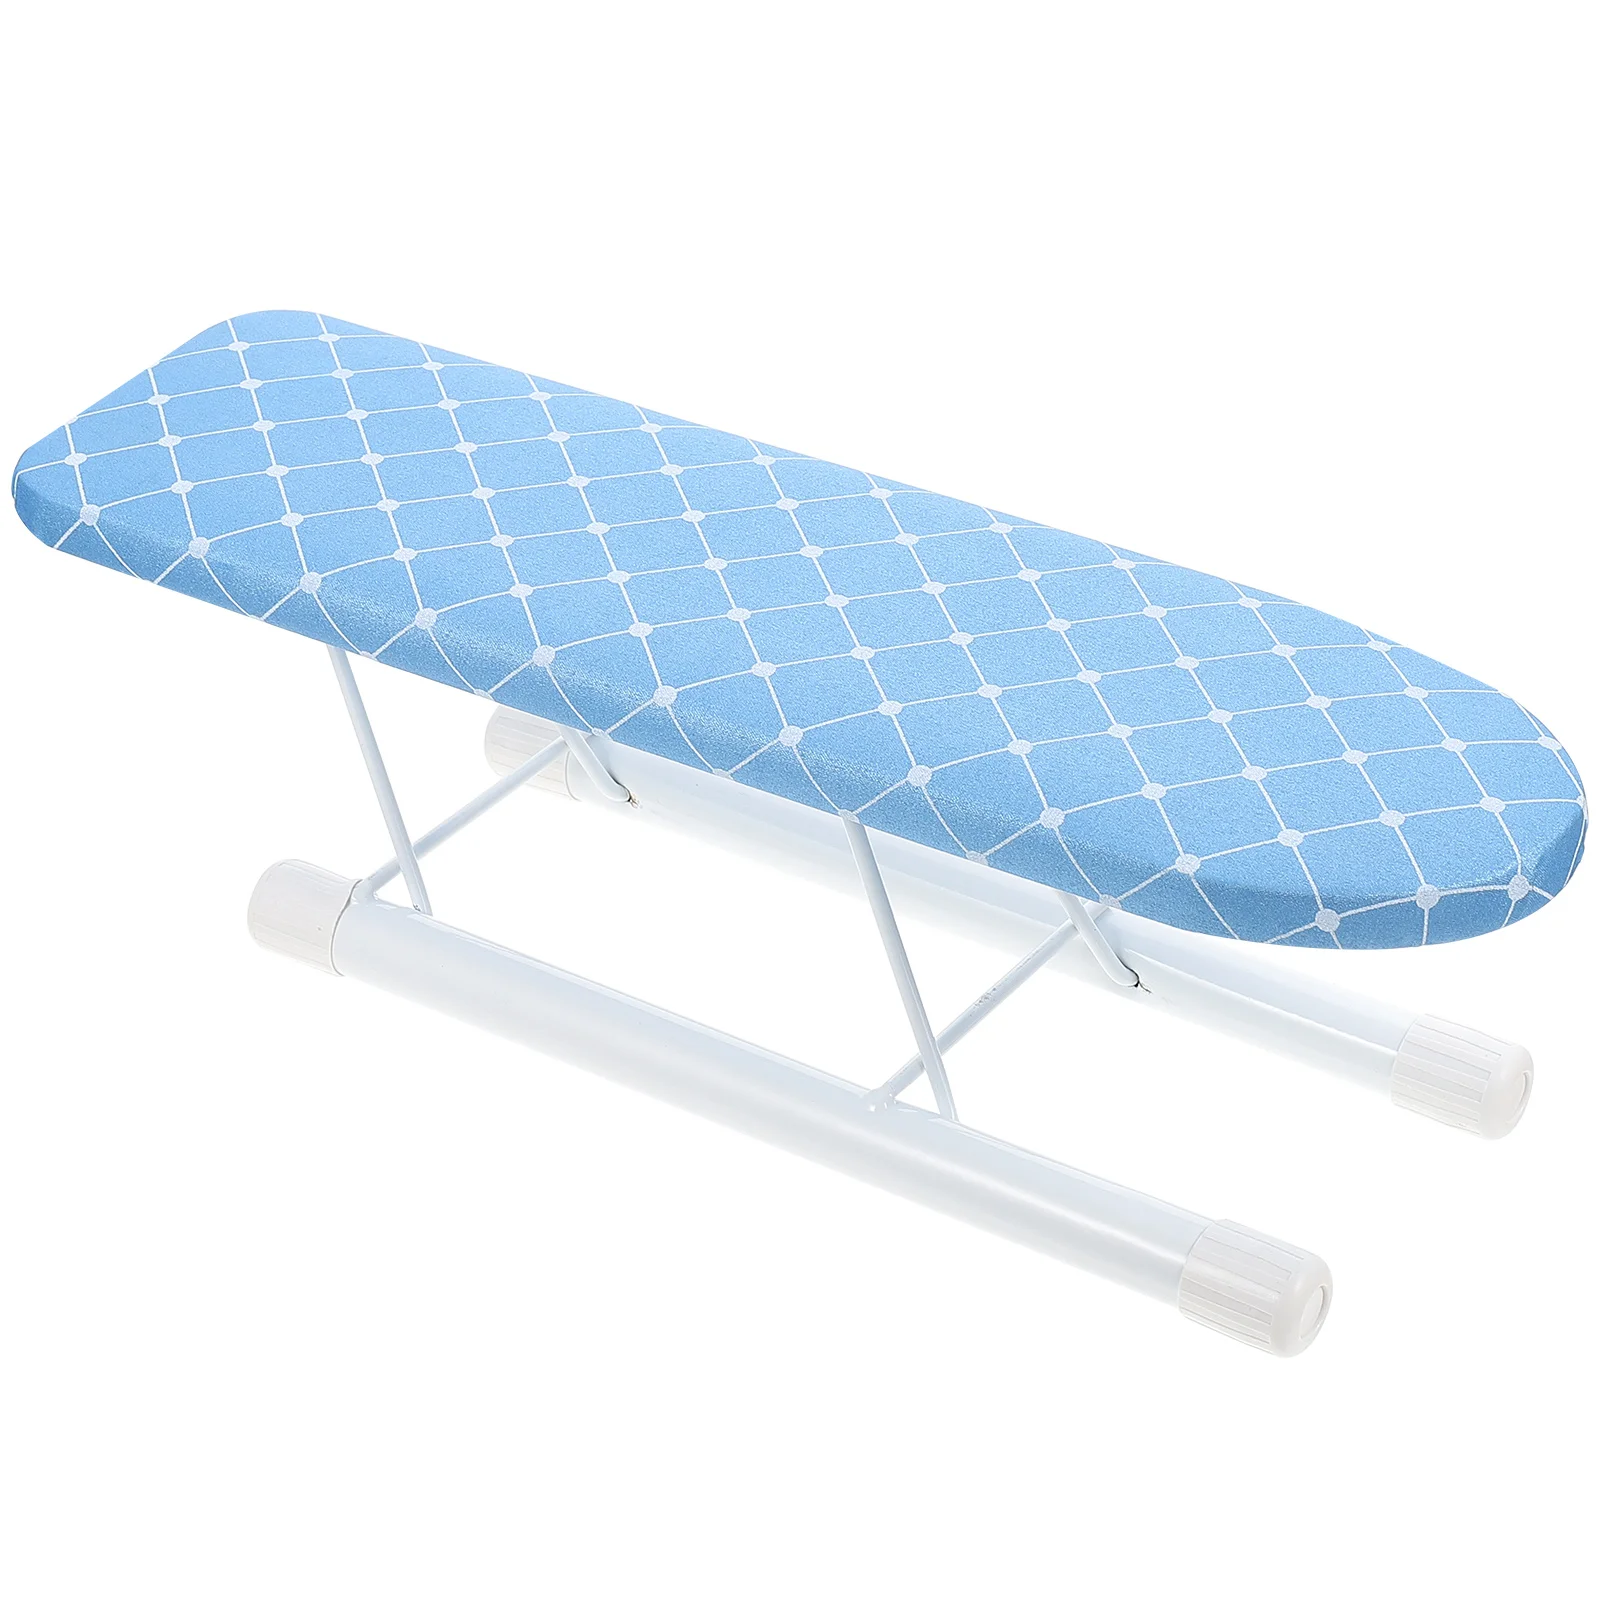 

Ironing Clothes Clothing Mini Table Shelf Folding Board Portable Iron Foldable Boards Covers Bench Quilters Tabletop Sleeve